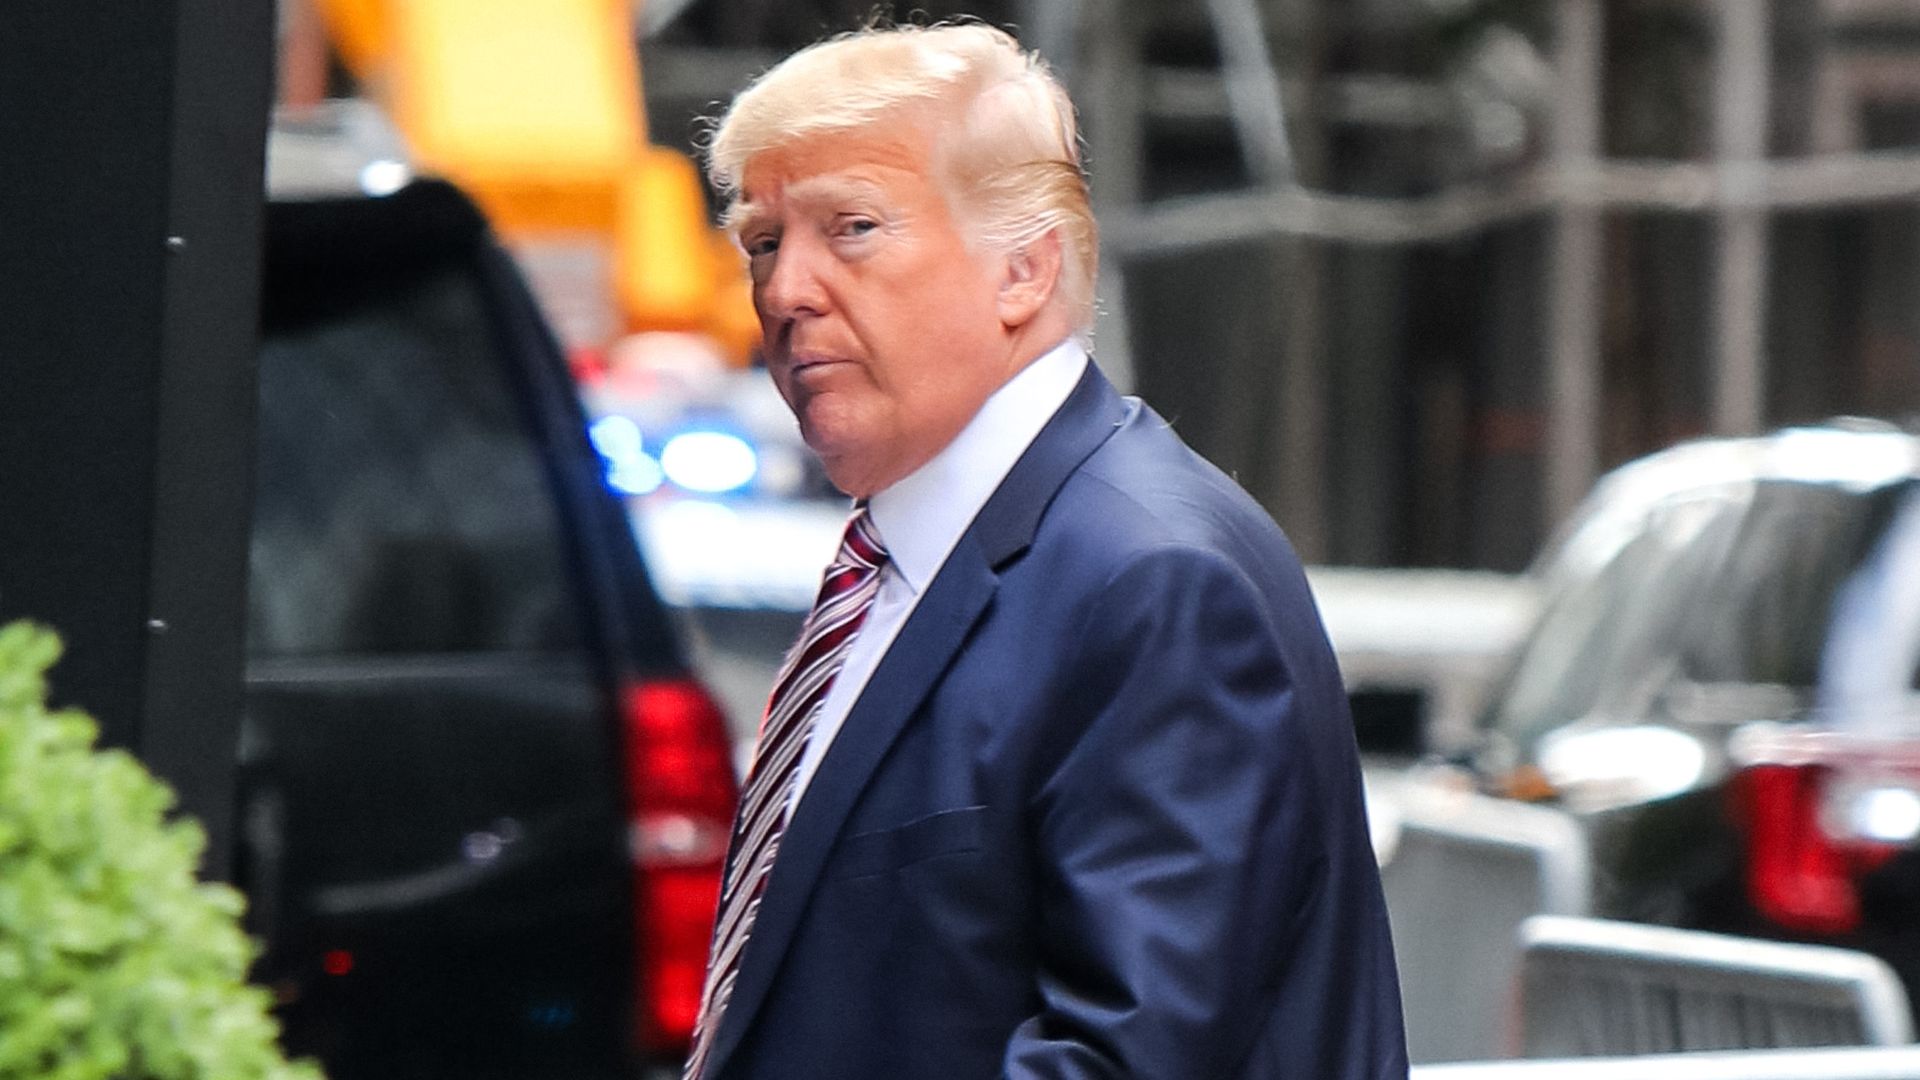  Former U.S. president Donald Trump is seen on May 24, 2021 in New York City.